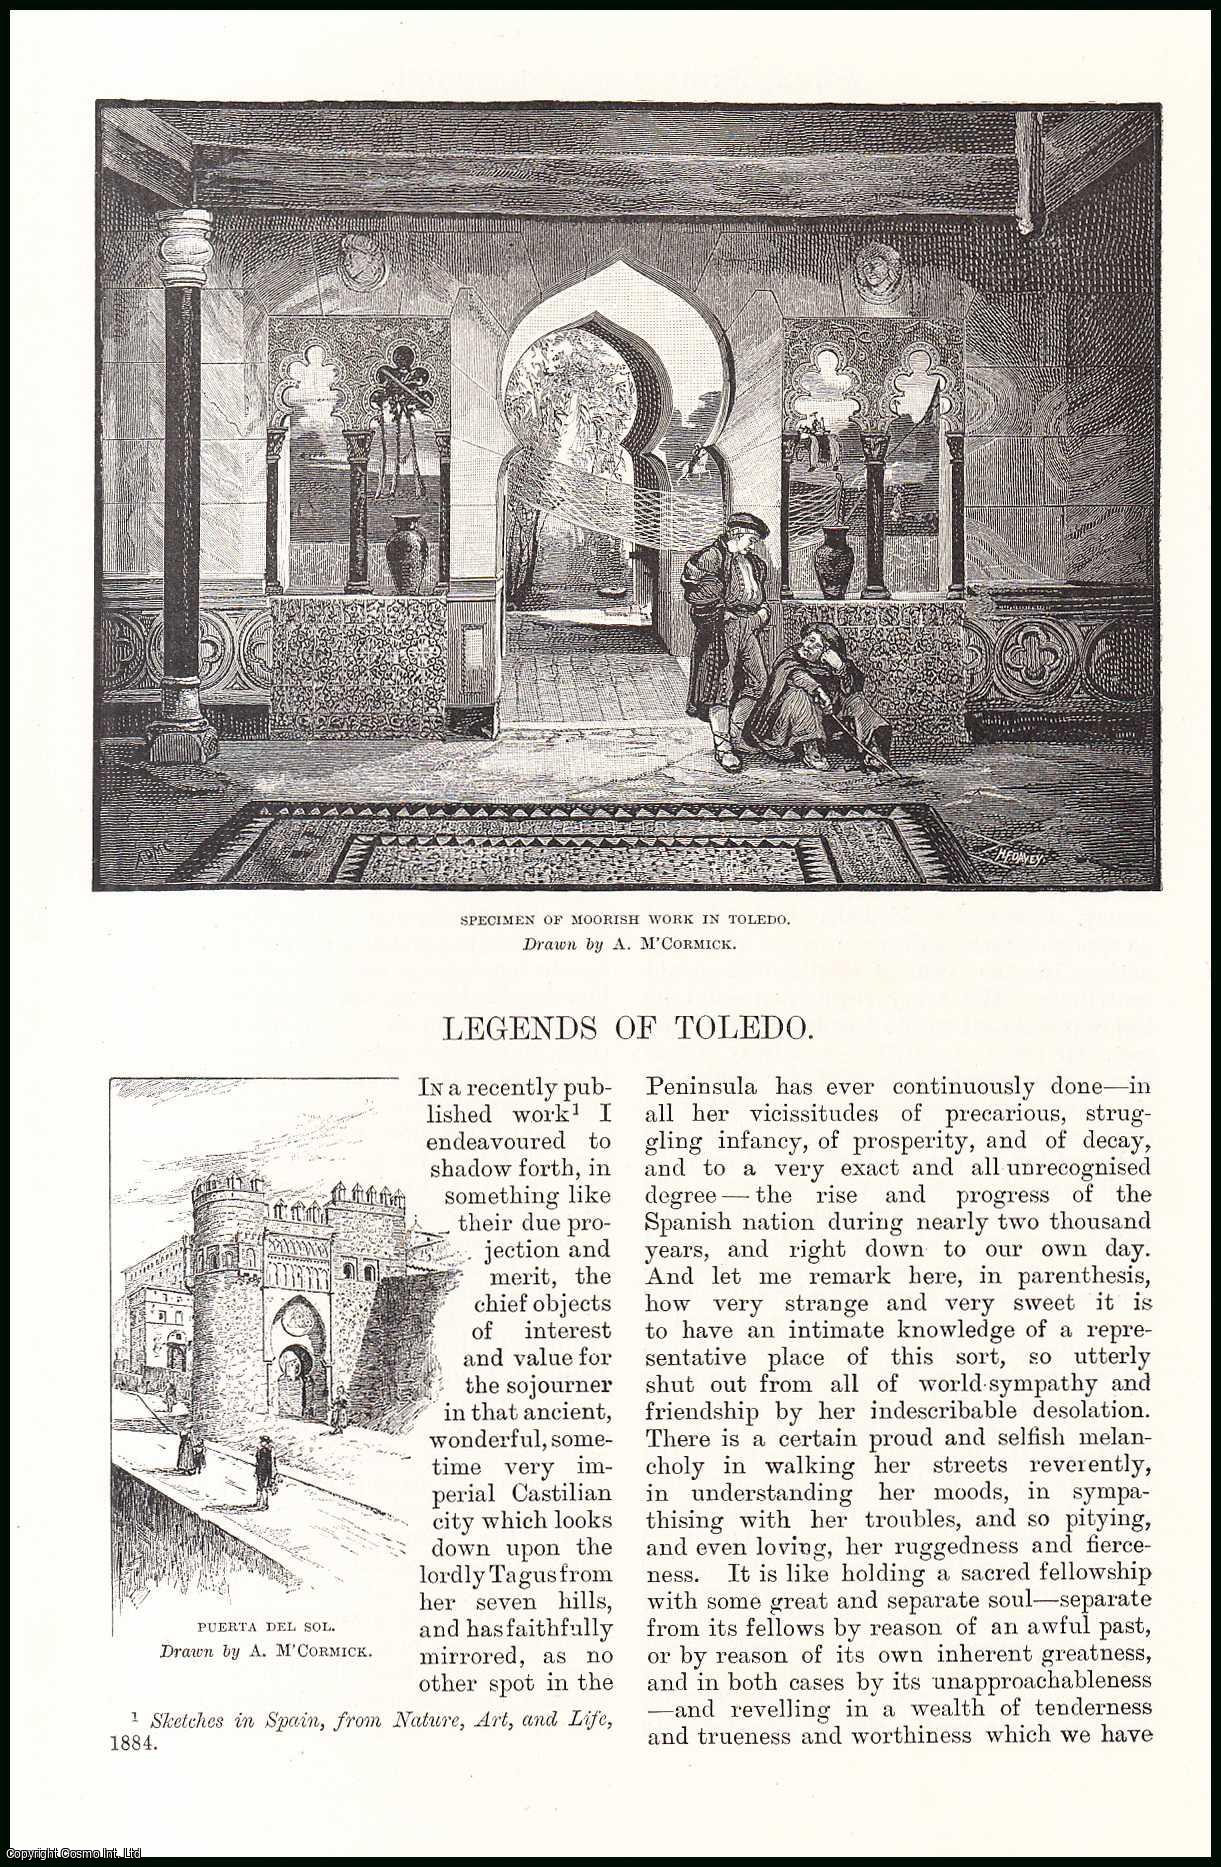 John Lomas, illustrations by A. McCormick - Legends of Toledo. An original article from the English Illustrated Magazine, 1885.